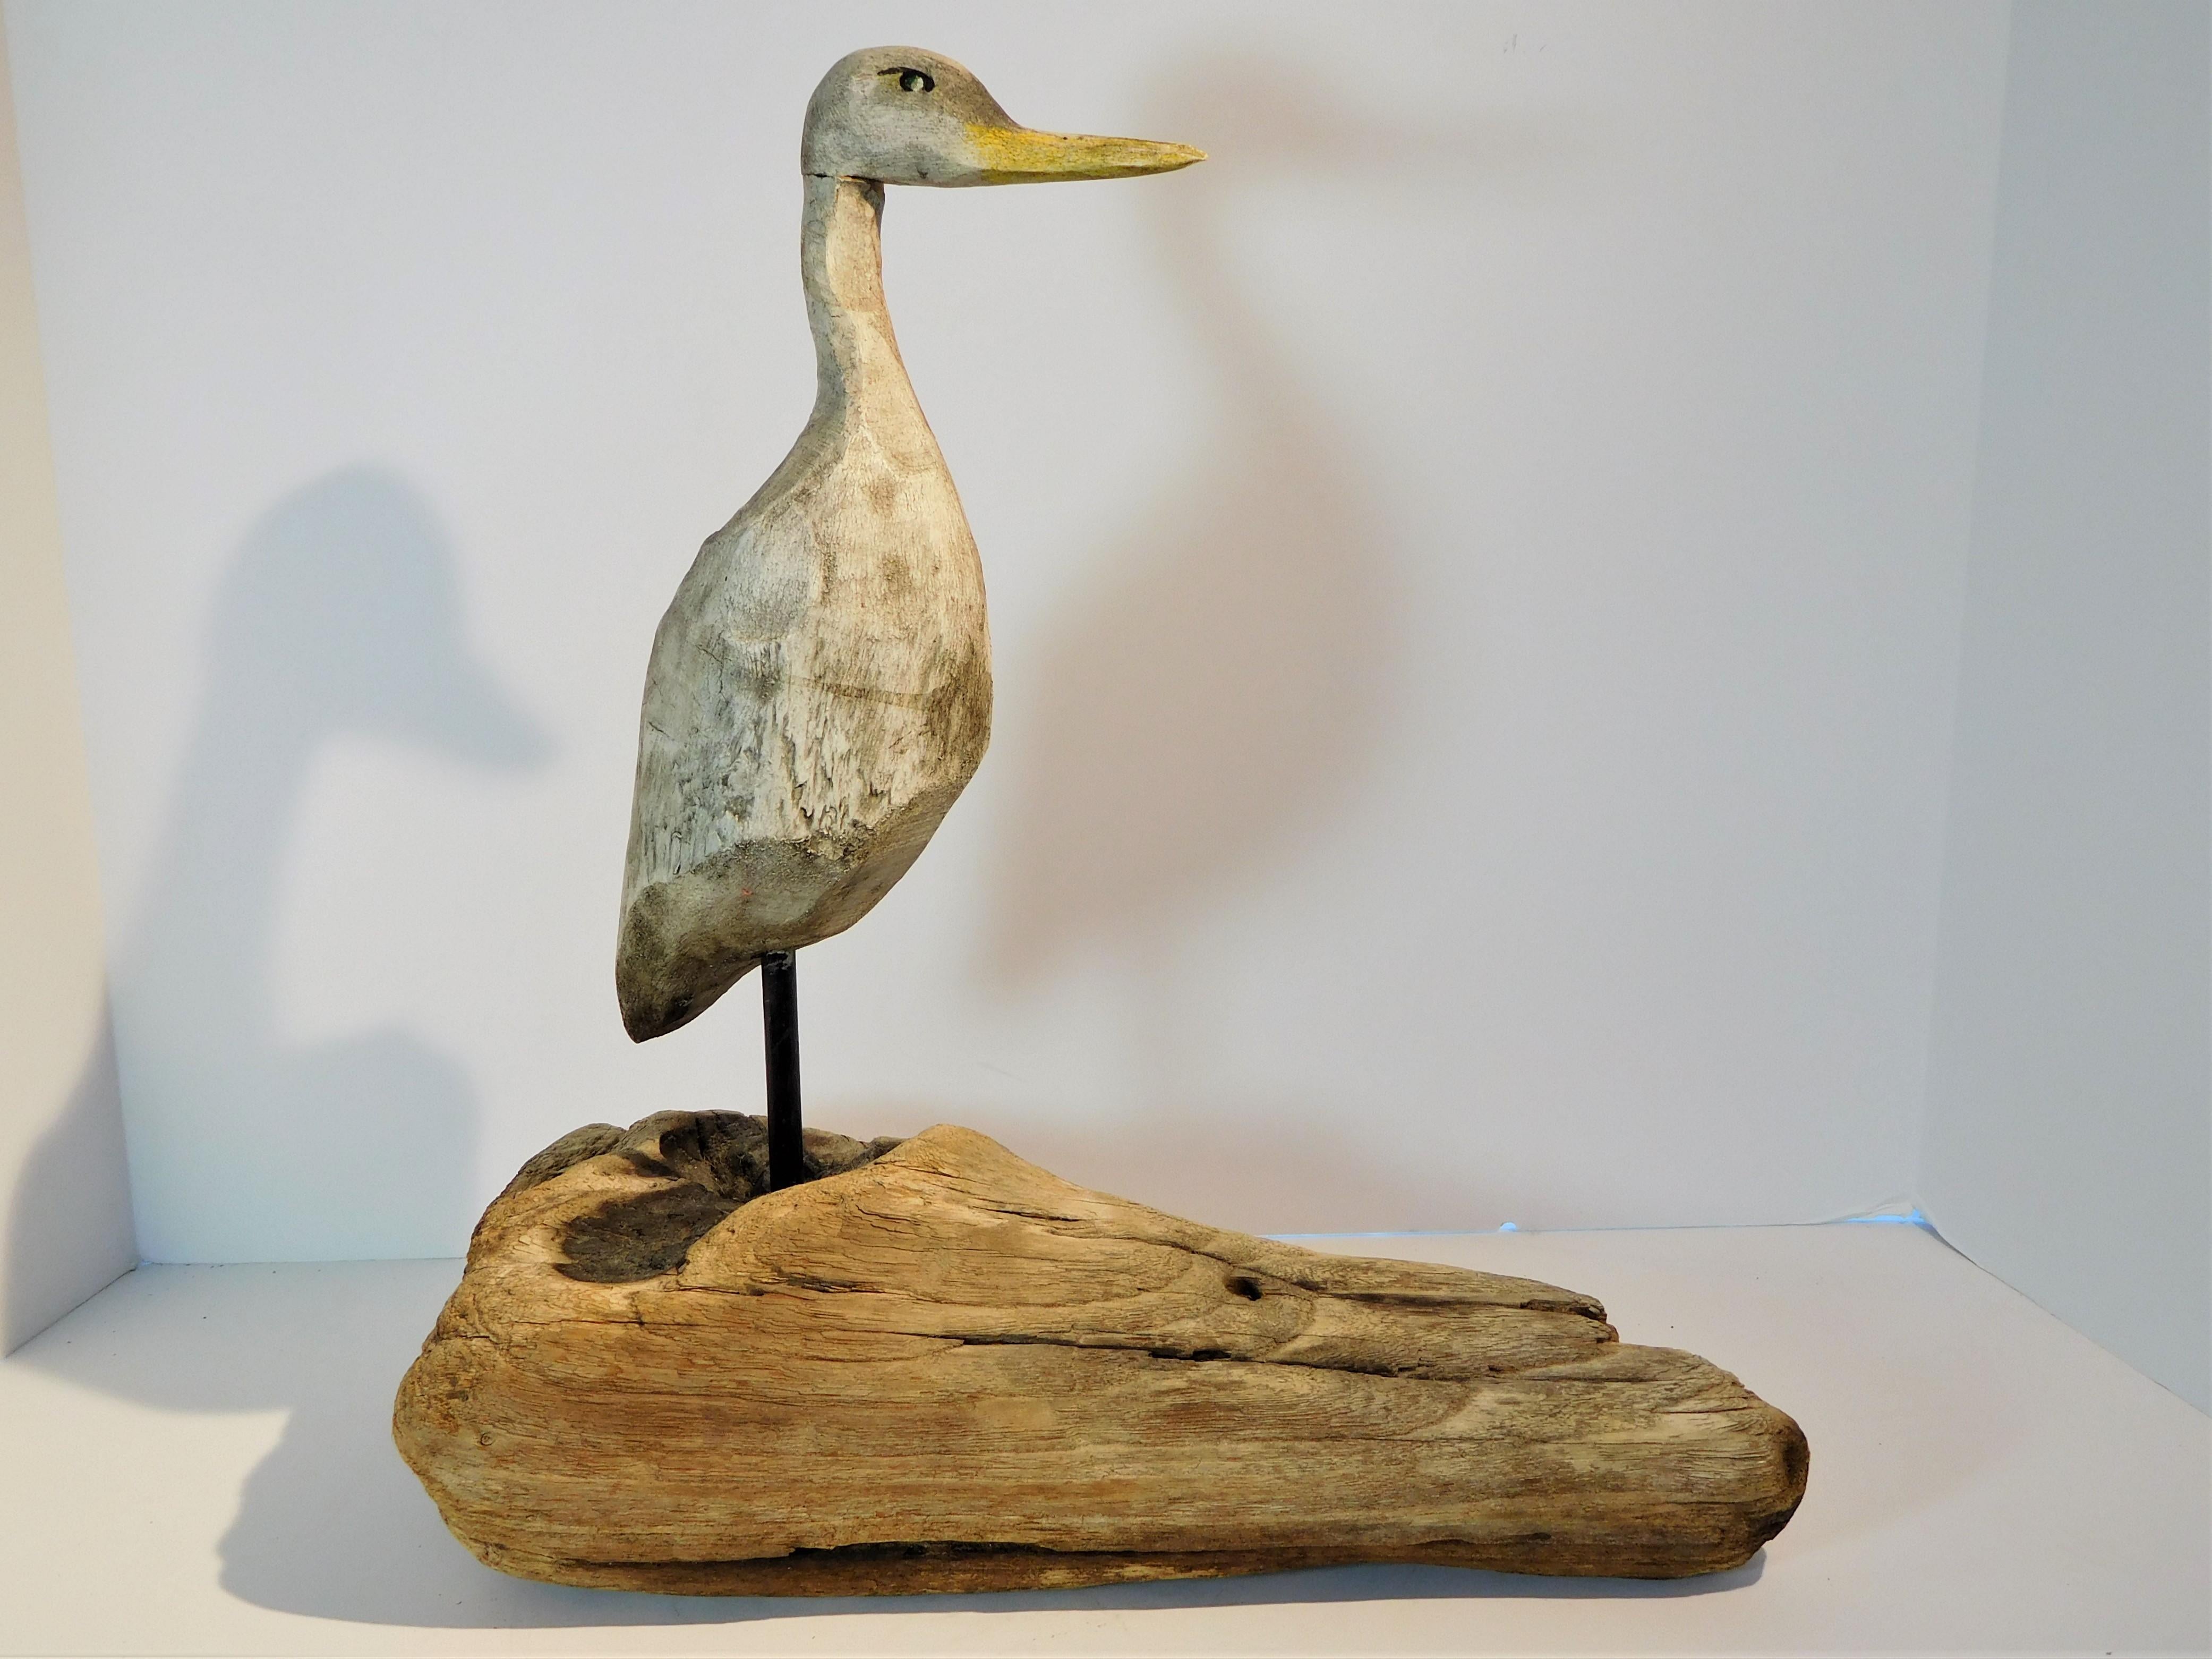 Wood Folk Art Carved and Painted Shore Bird Decoy, Mid-20th Century For Sale